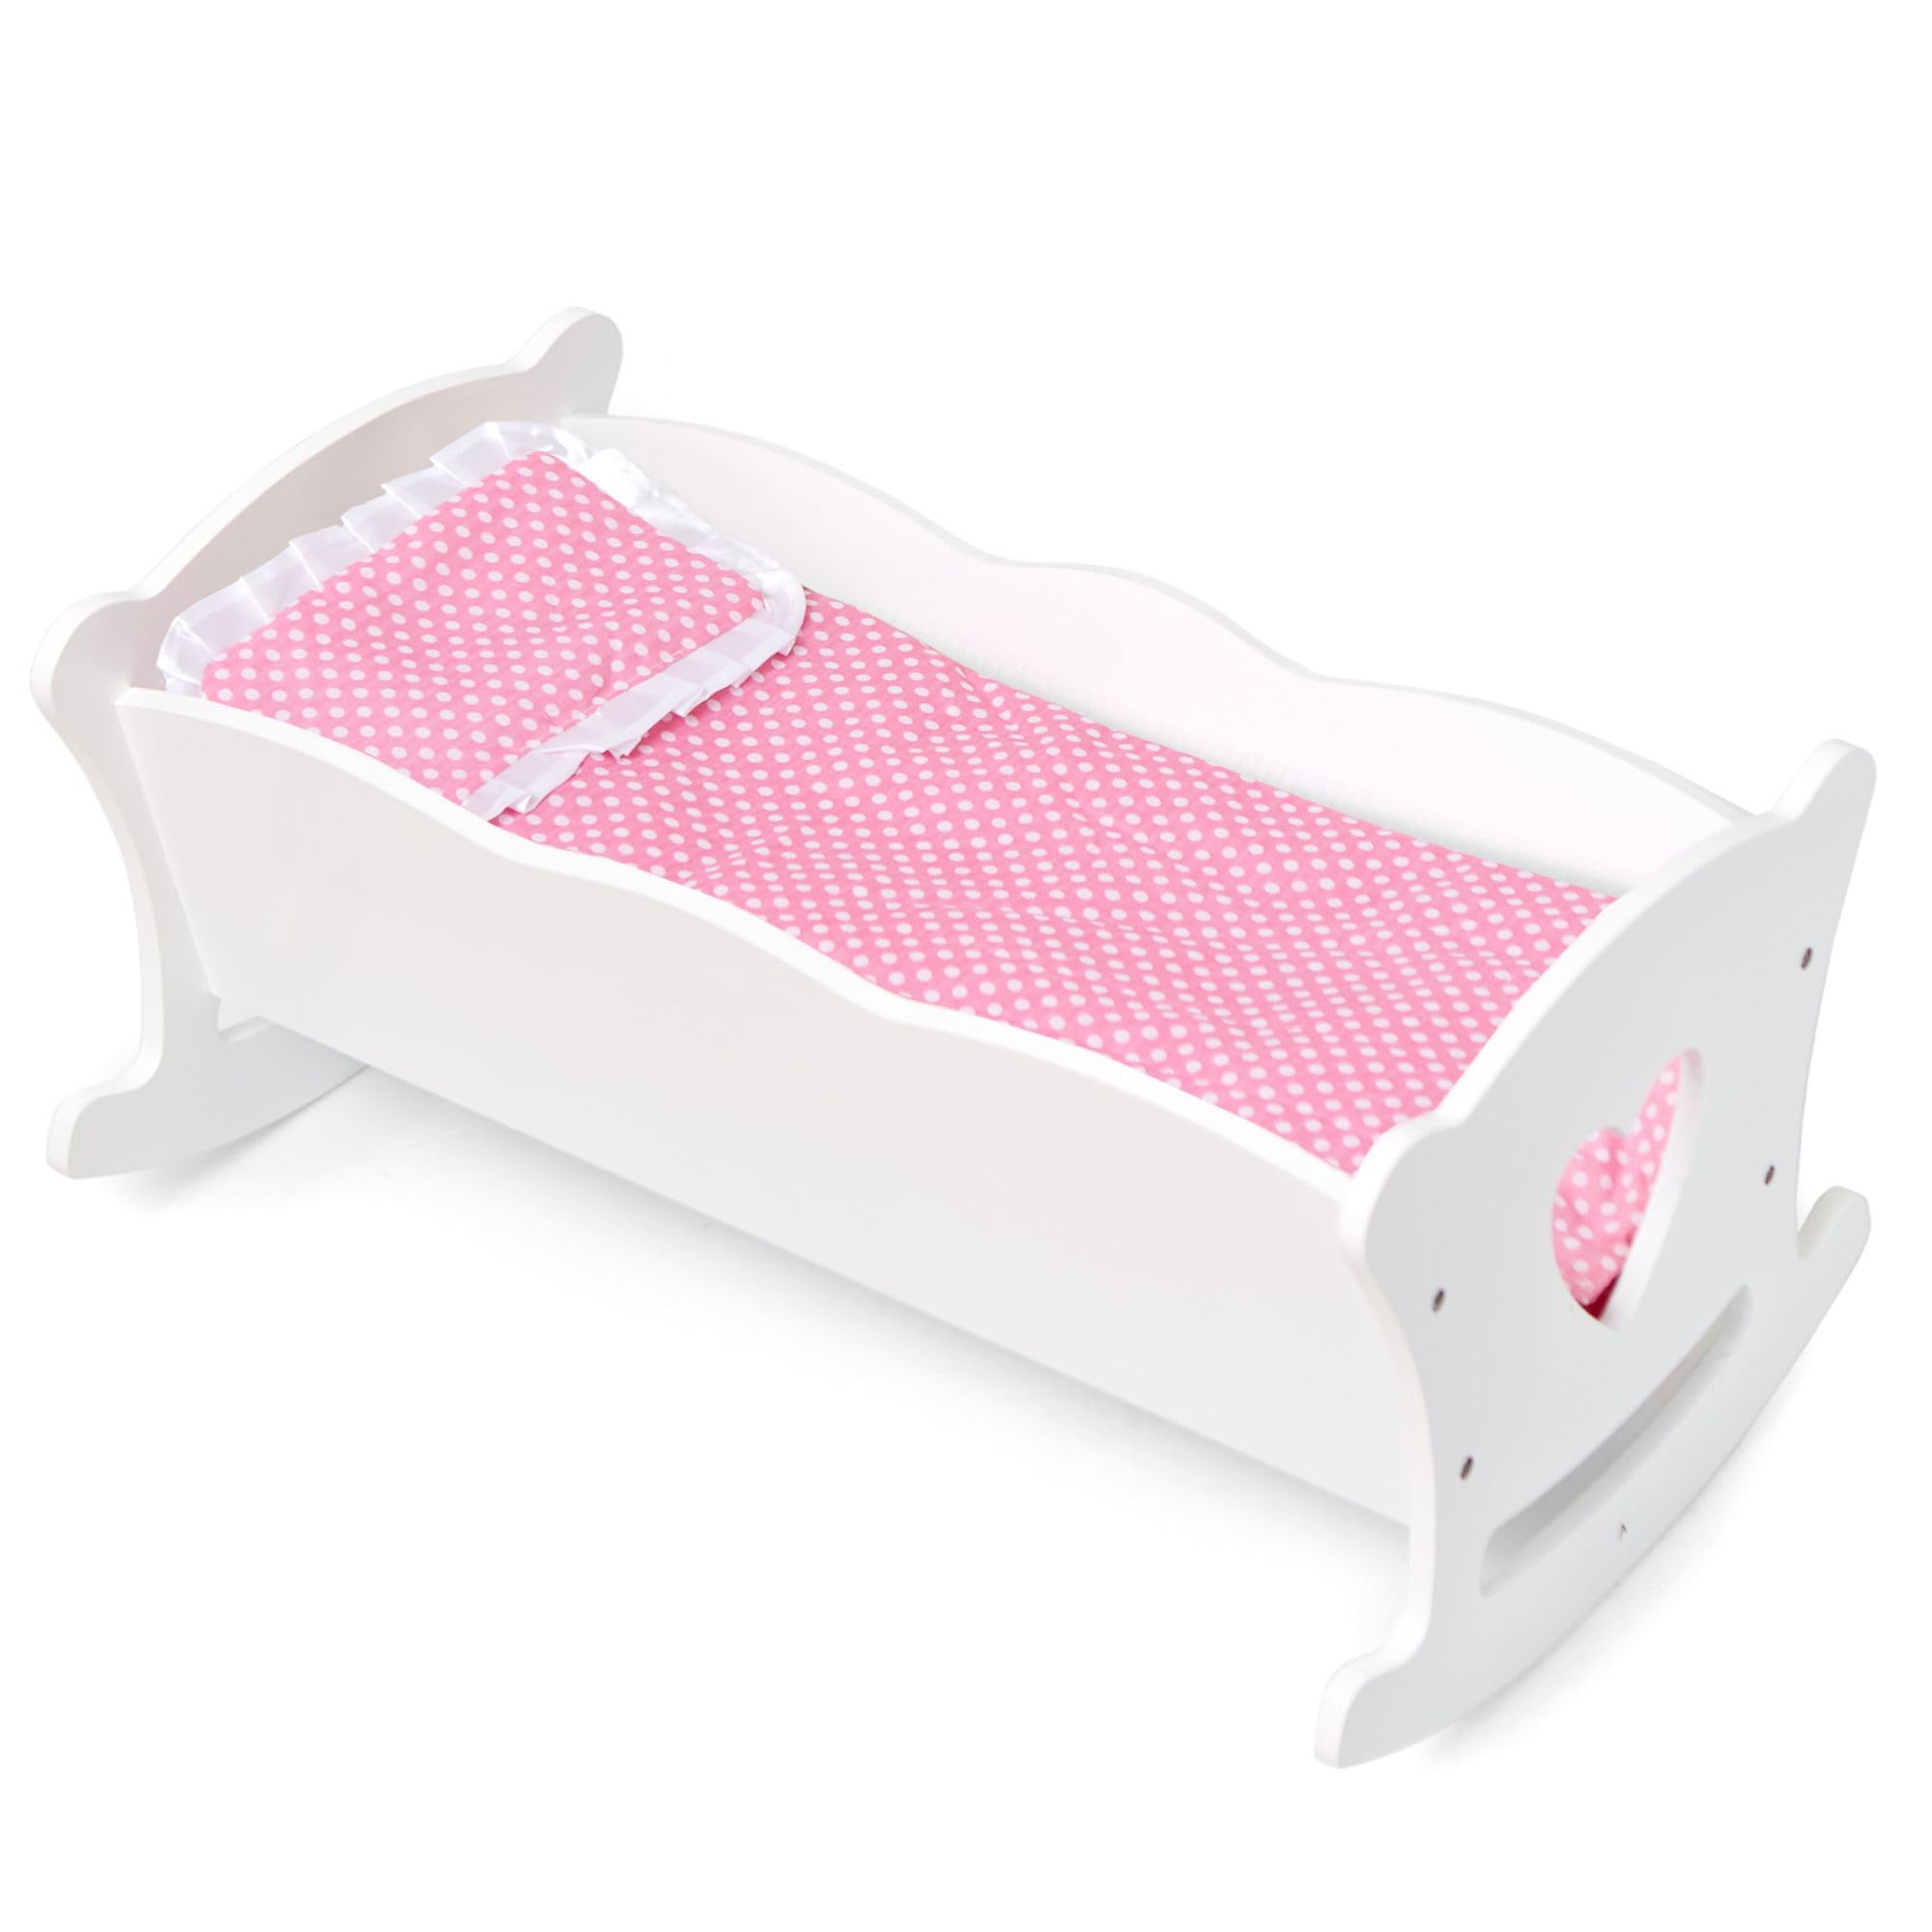 Wildkin Kids Doll Cradle and Bedding Set for Toddler Girls, Wooden Baby Doll Rocking Cradle Includes Pillow and Blanket, Fits Dolls Up To 20 Inches, Compatible with Most Popular Dolls (White)